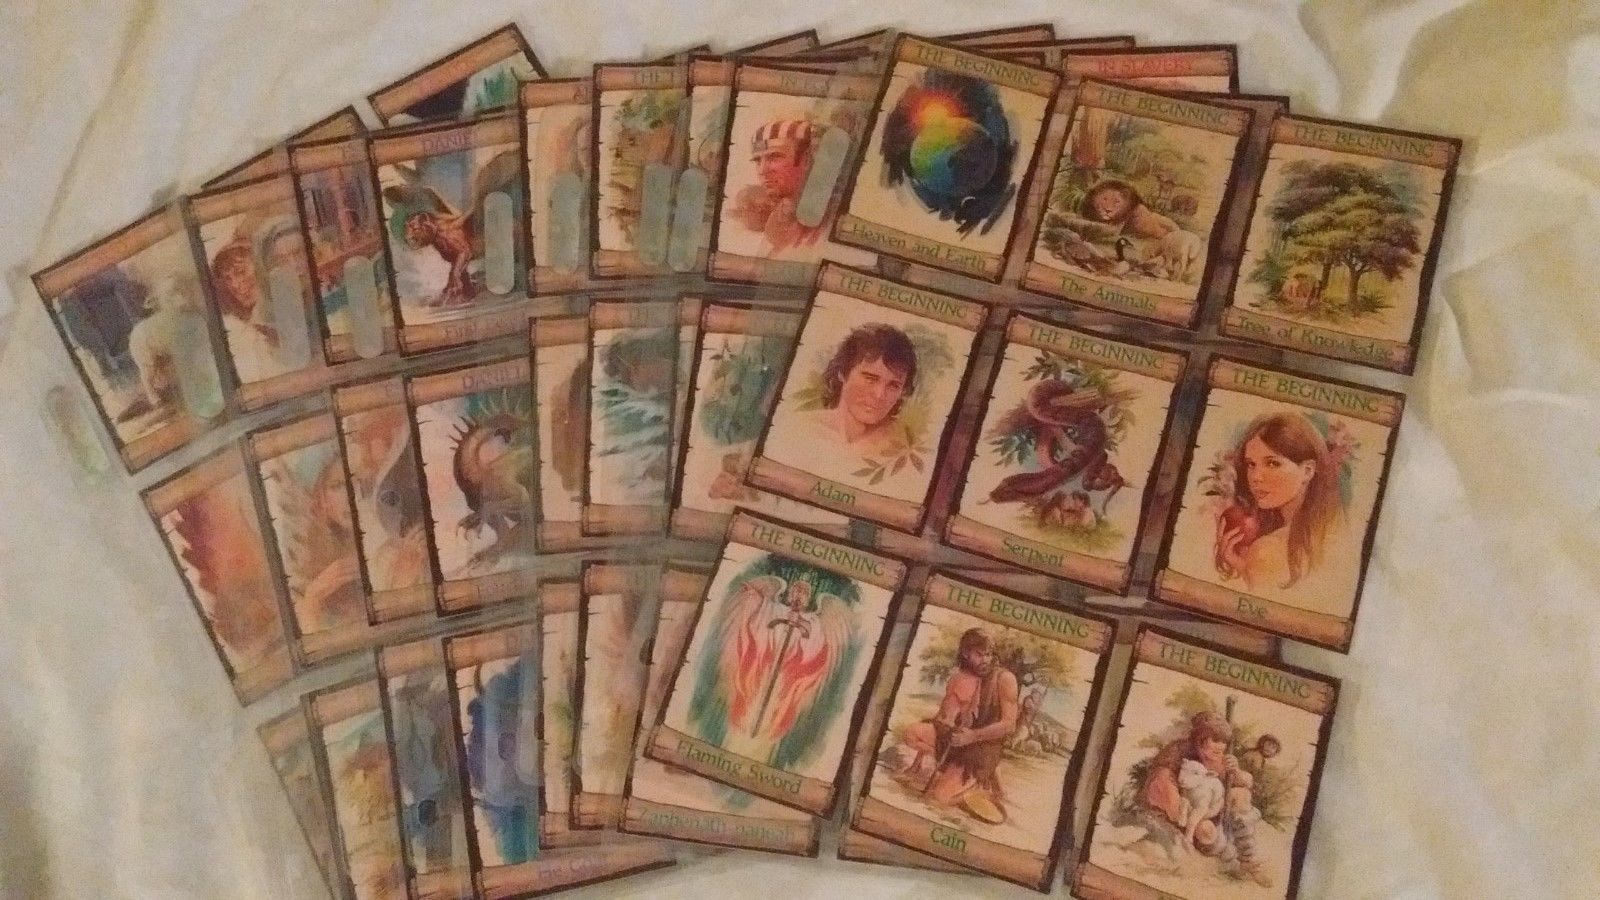 1989-bible-trading-cards-89-cards-missing-1-card-antique-price